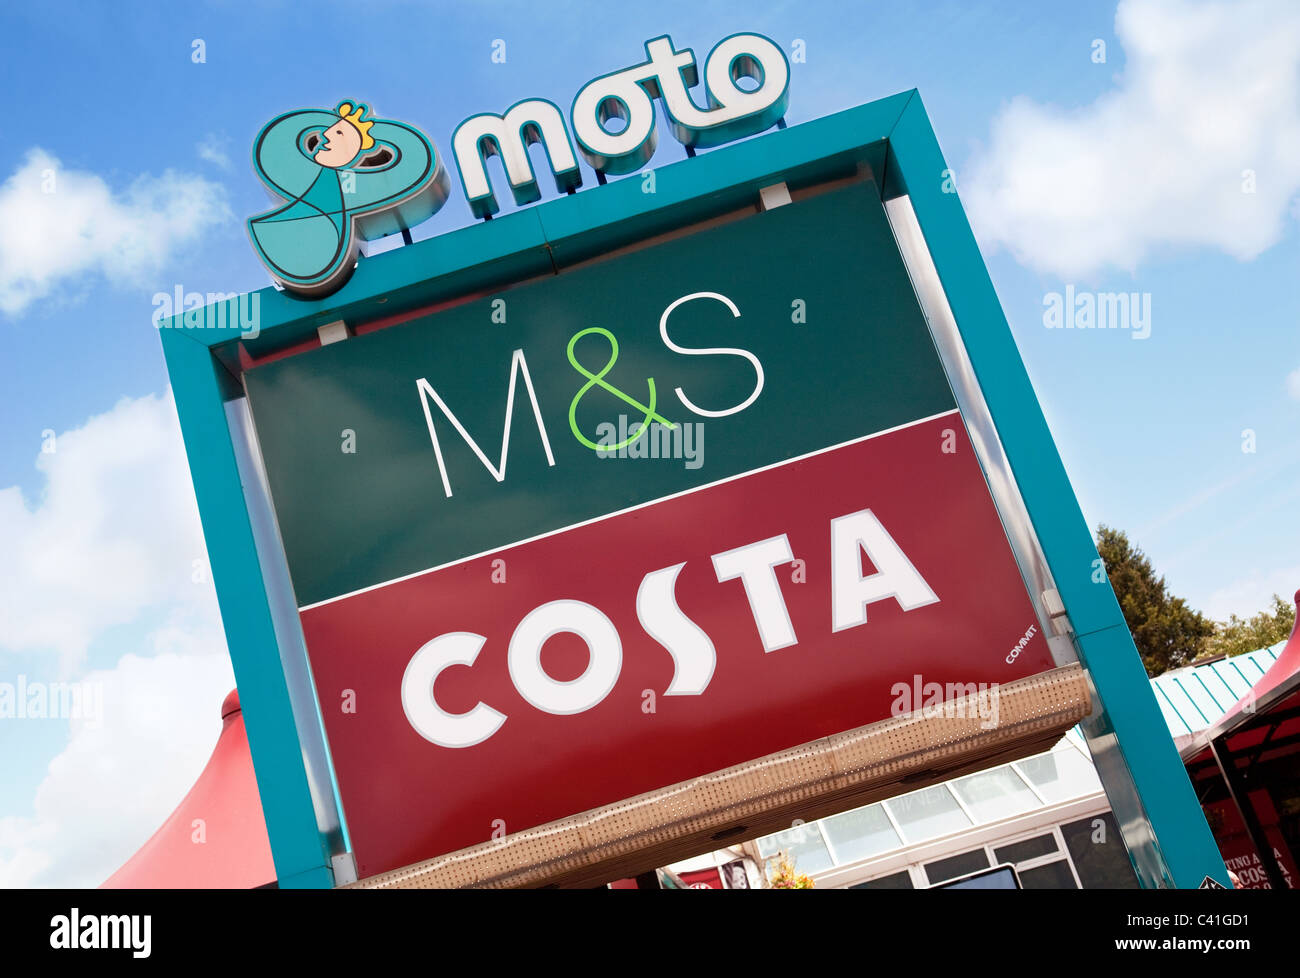 The sign for the Exeter motorway service station run by Moto, on the M5 in Devon, UK Stock Photo